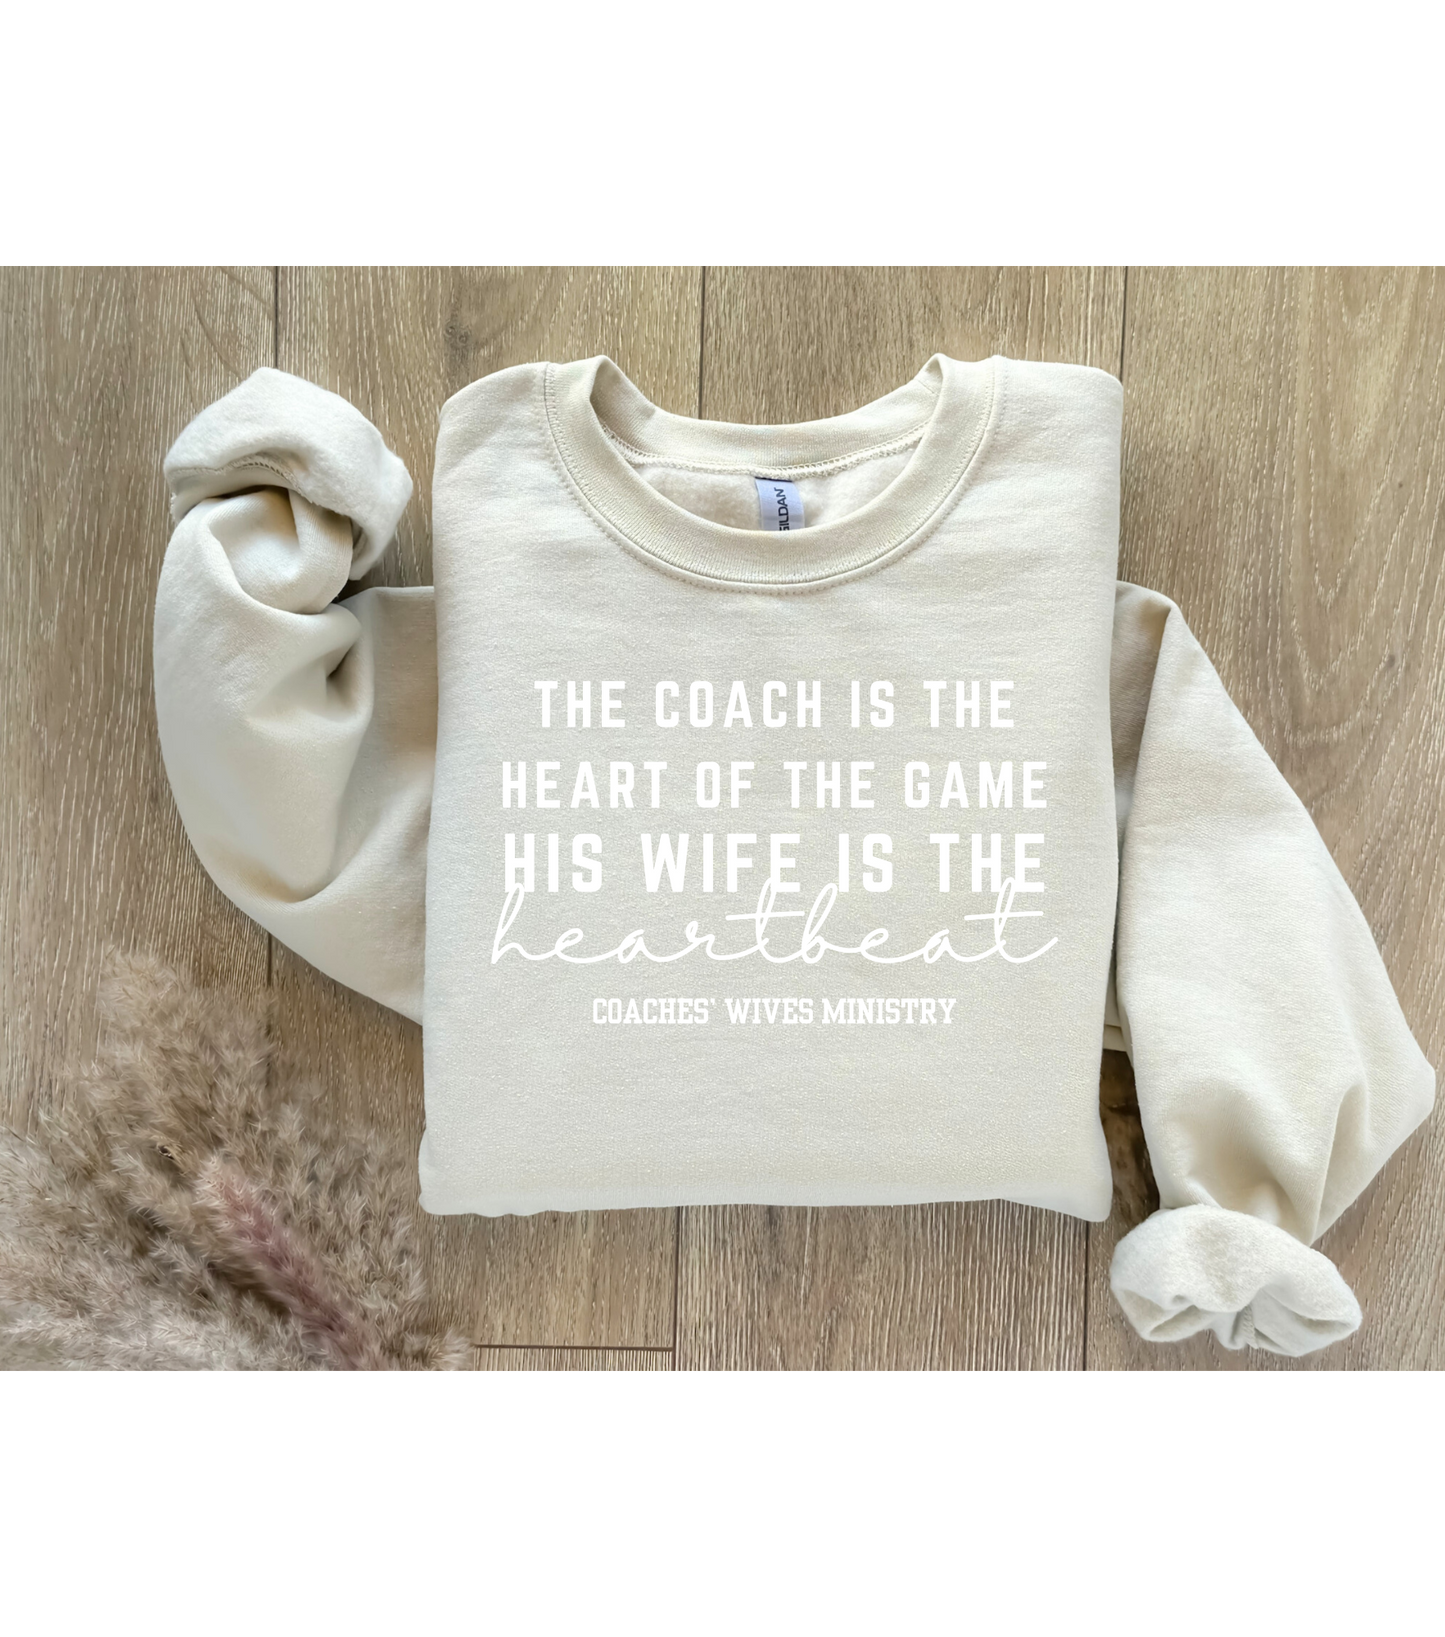 The Coach Is The Heart Of The Game, His Wife is The Heartbeat Crewneck Sweatshirt